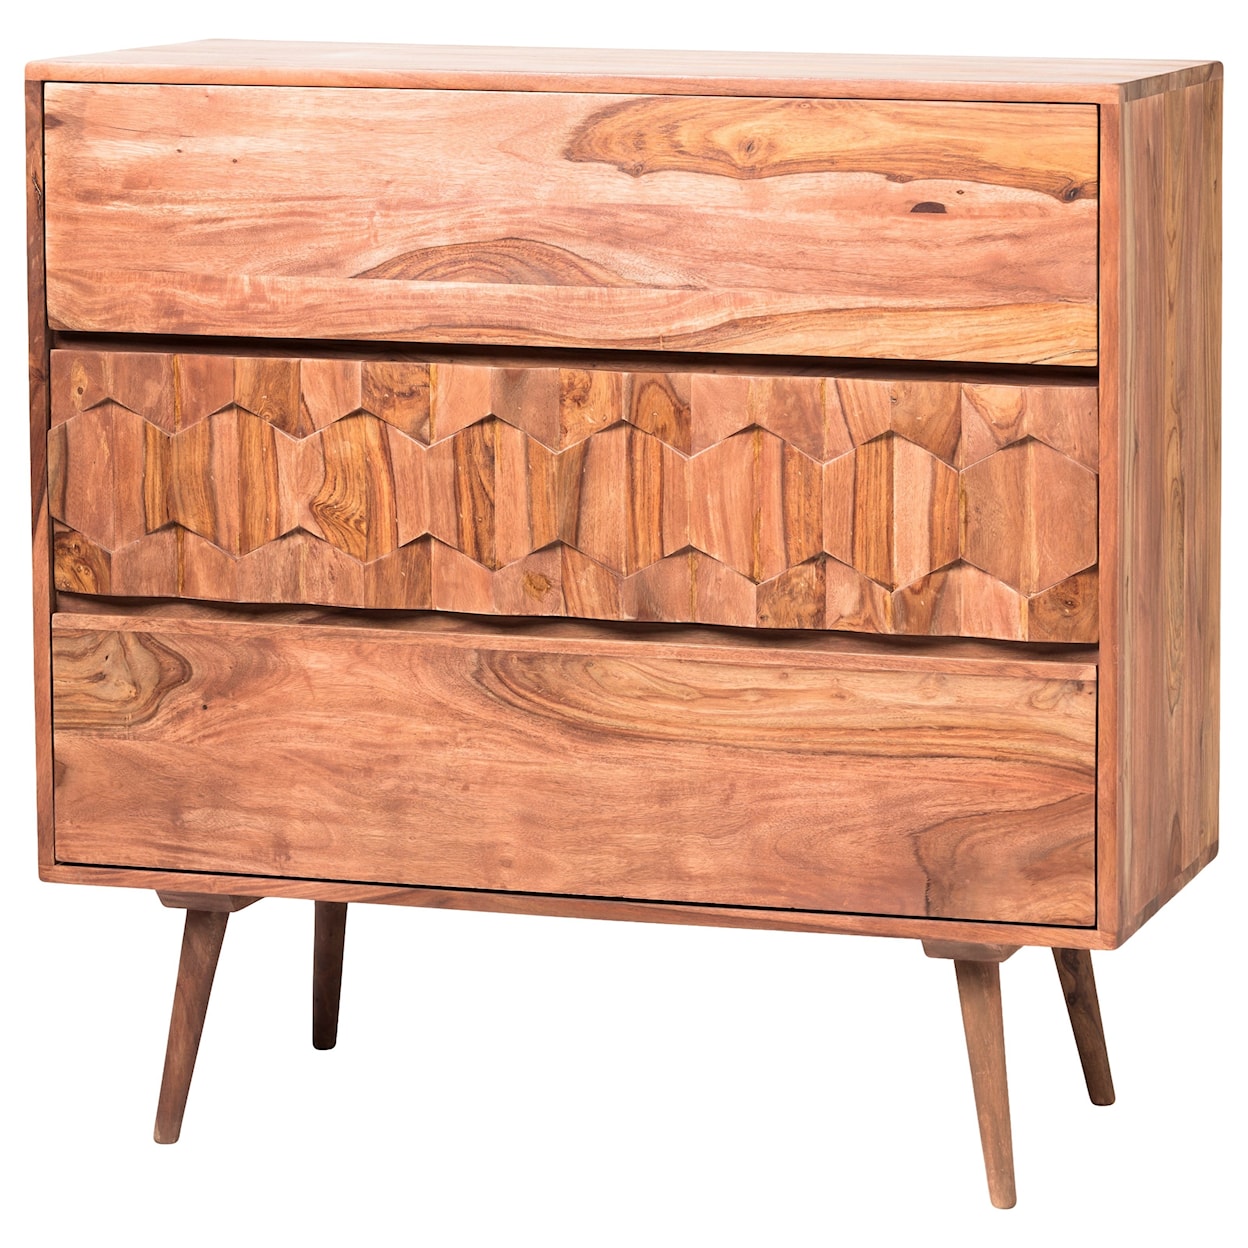 Moe's Home Collection O2 Three-Drawer Bedroom Chest